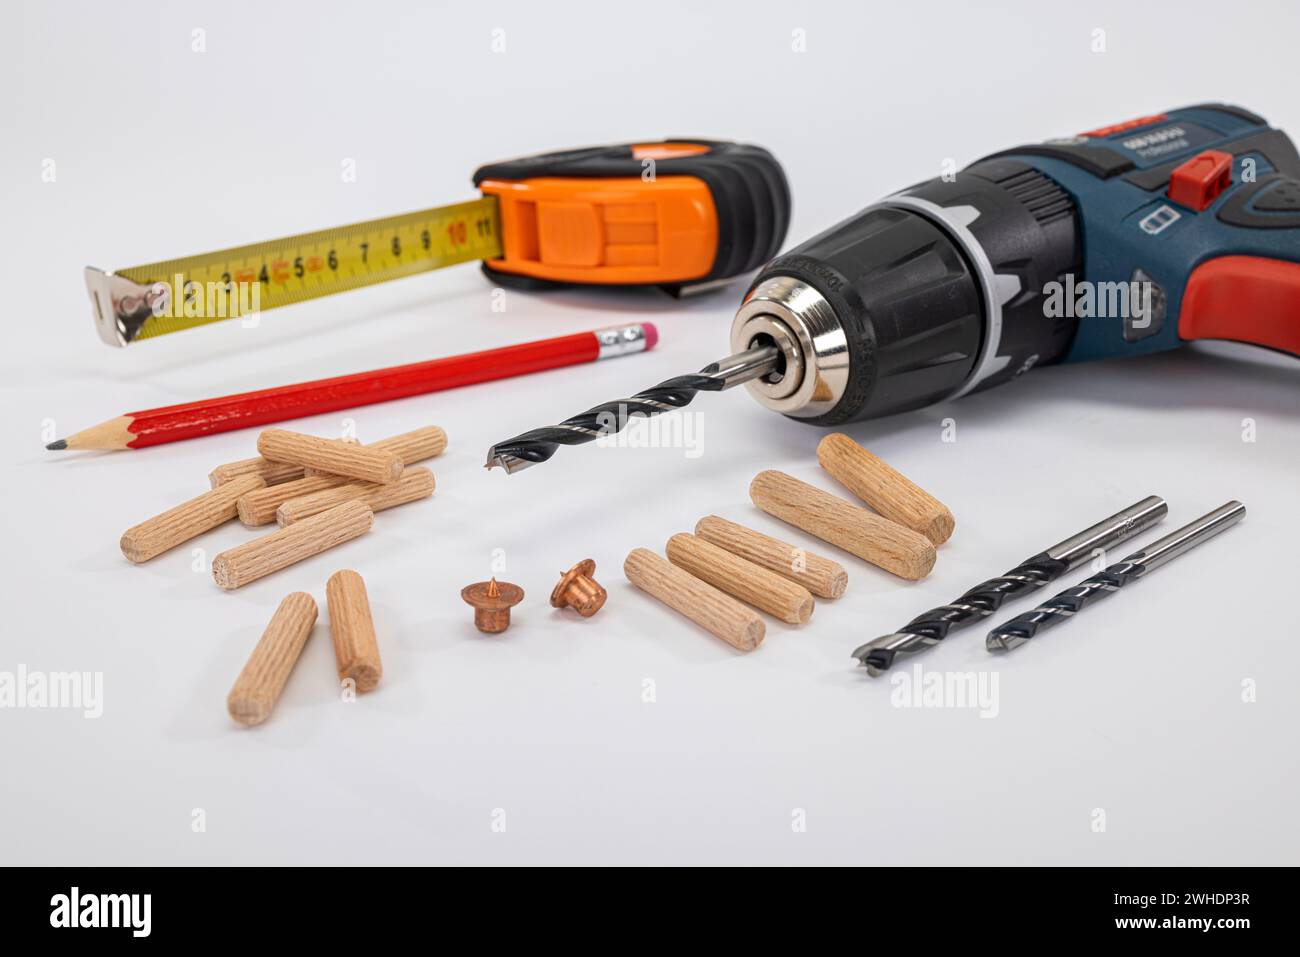 Tools for setting wooden dowels, dowel fixer, wood drill, pencil, tape measure, cordless drill, white background, Stock Photo